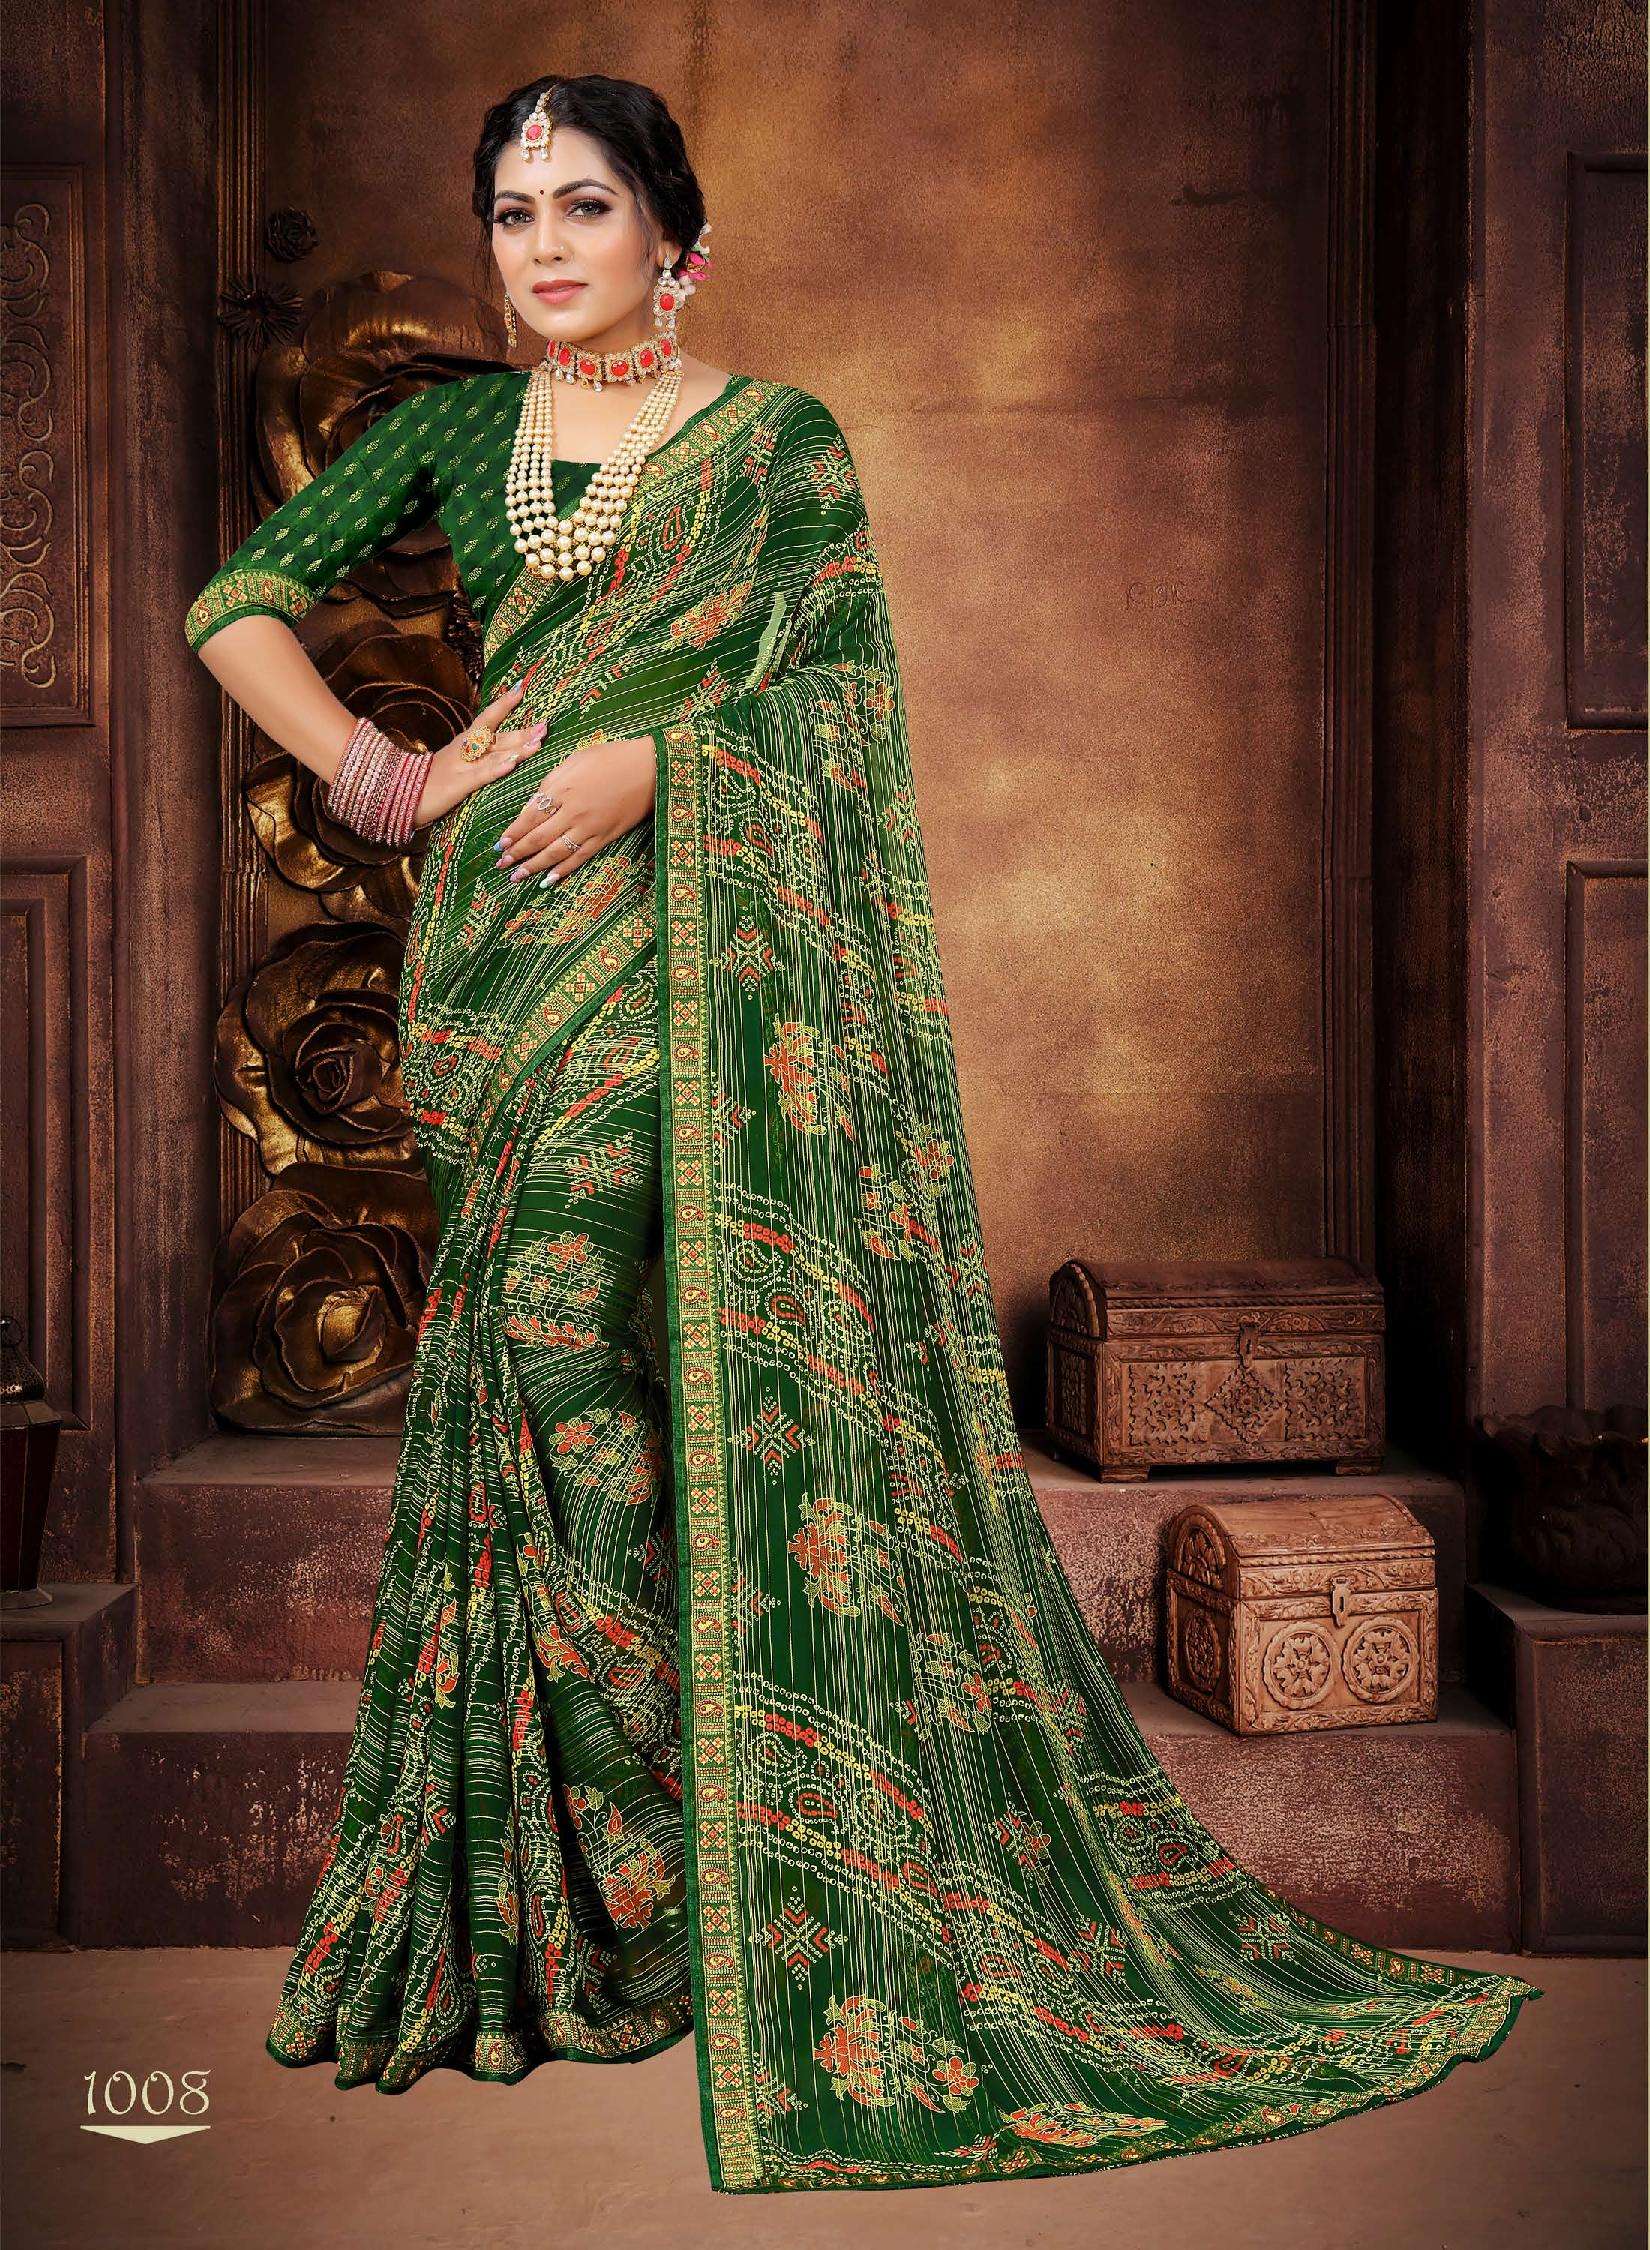 Pooja By Amarsath 1001 To 1008 Series Fancy Print Sarees 